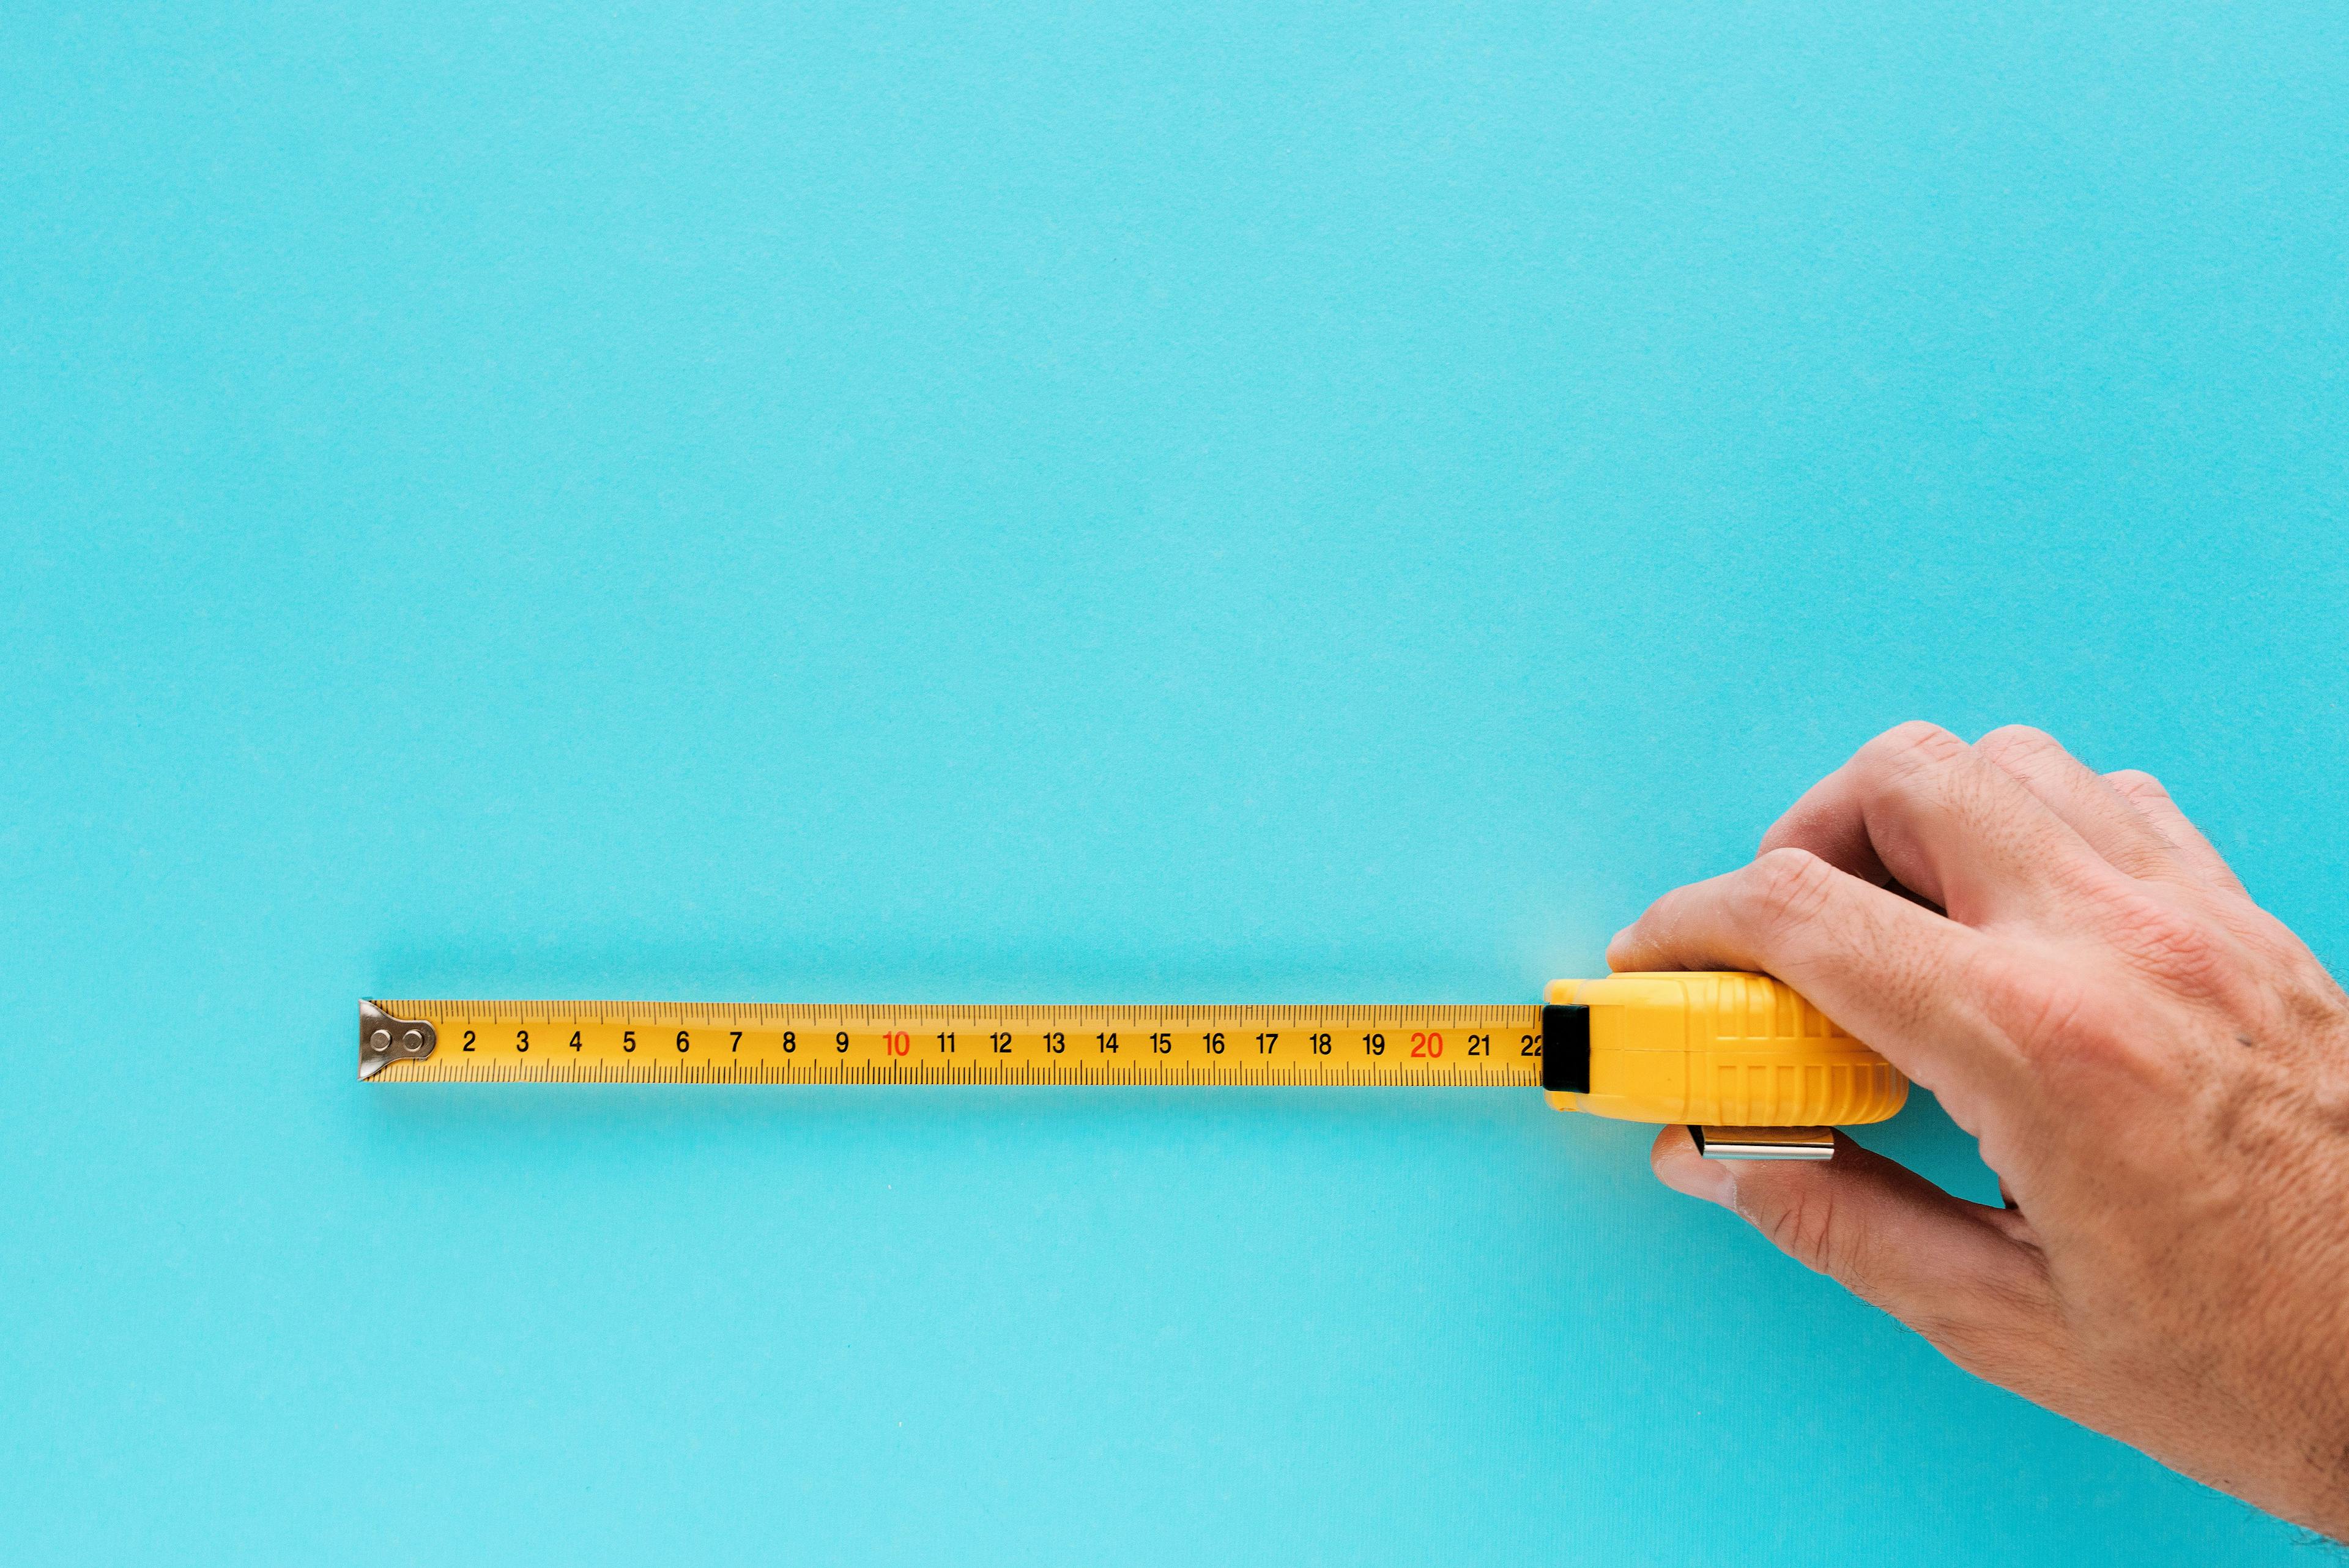 yellow measuring tape on turquoise background | image credit: bits and splits stock.adobe.com